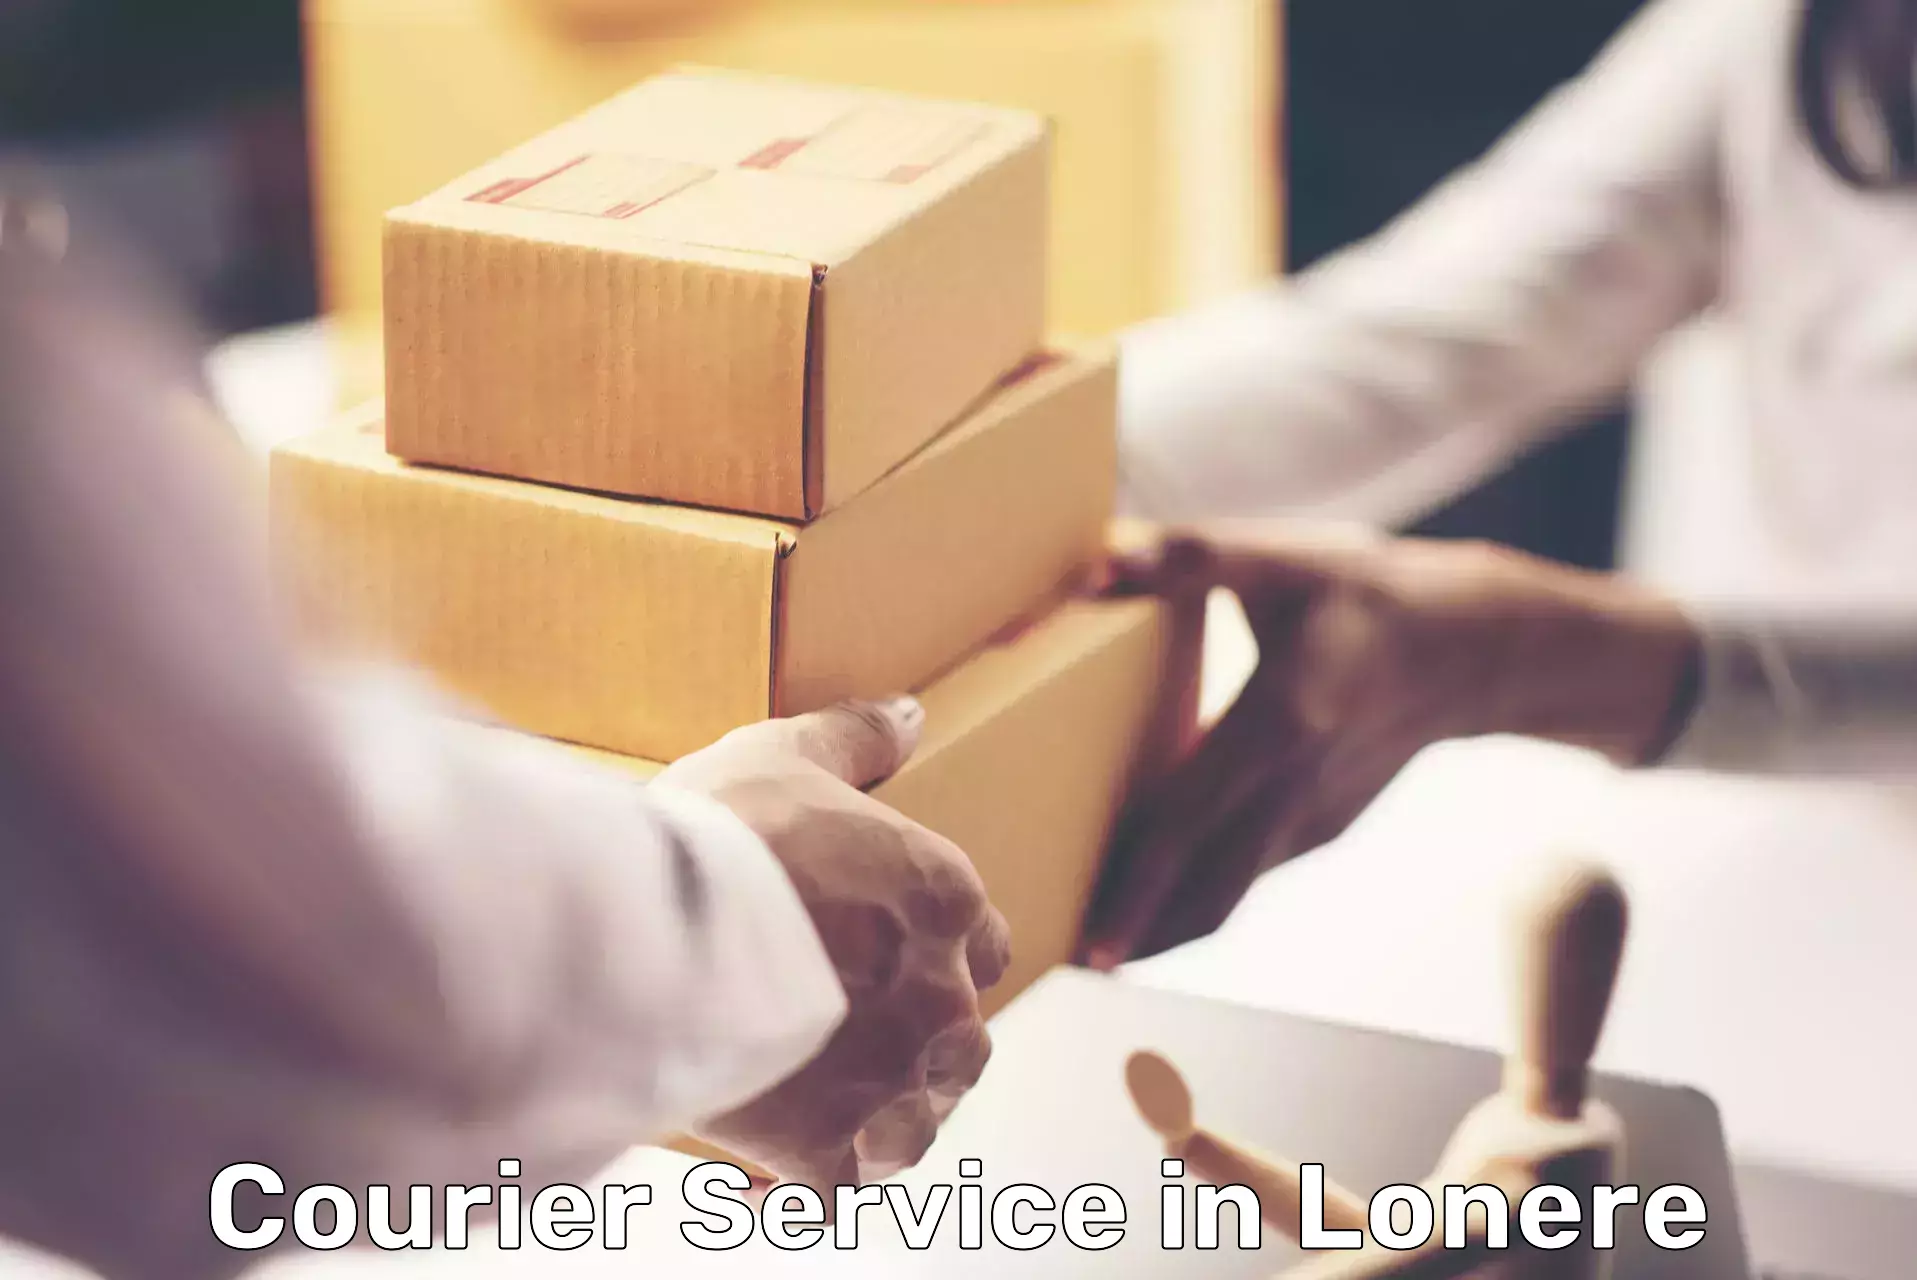 Specialized shipment handling in Lonere